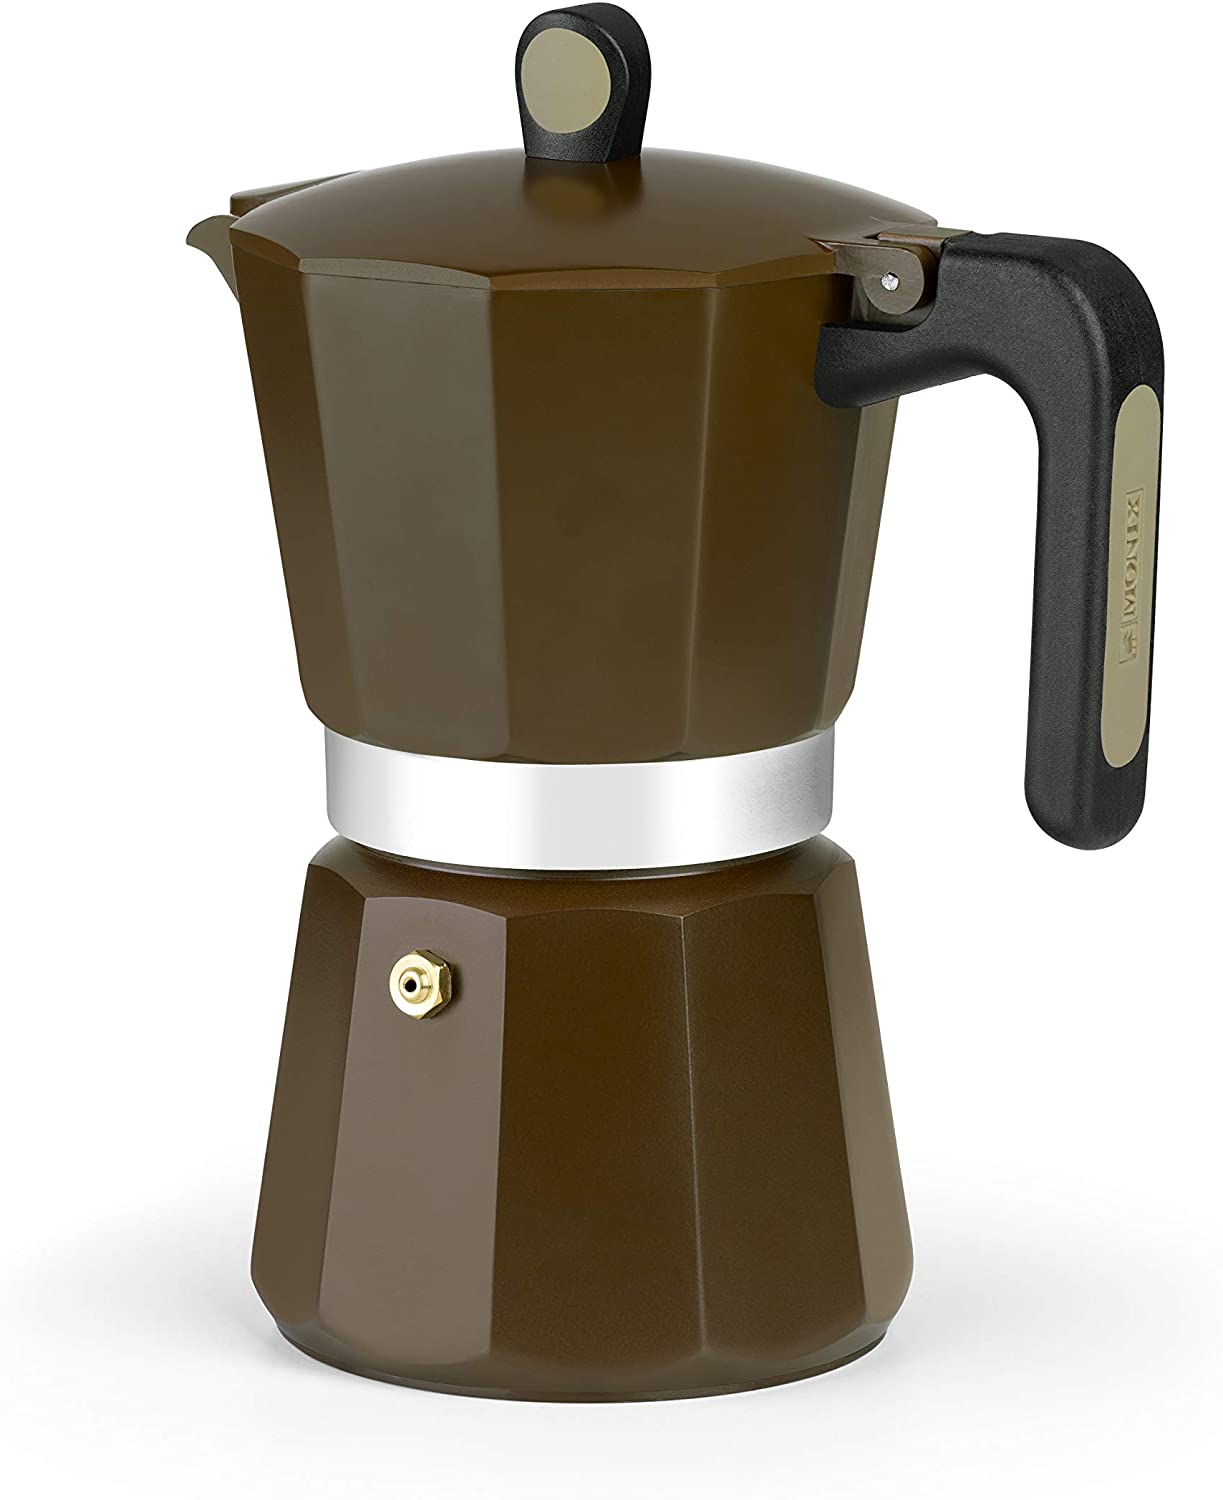 Monix M671012 New Cream Italian Aluminium Coffee Maker for 12 Cups Suitable for All Hob Types including Induction